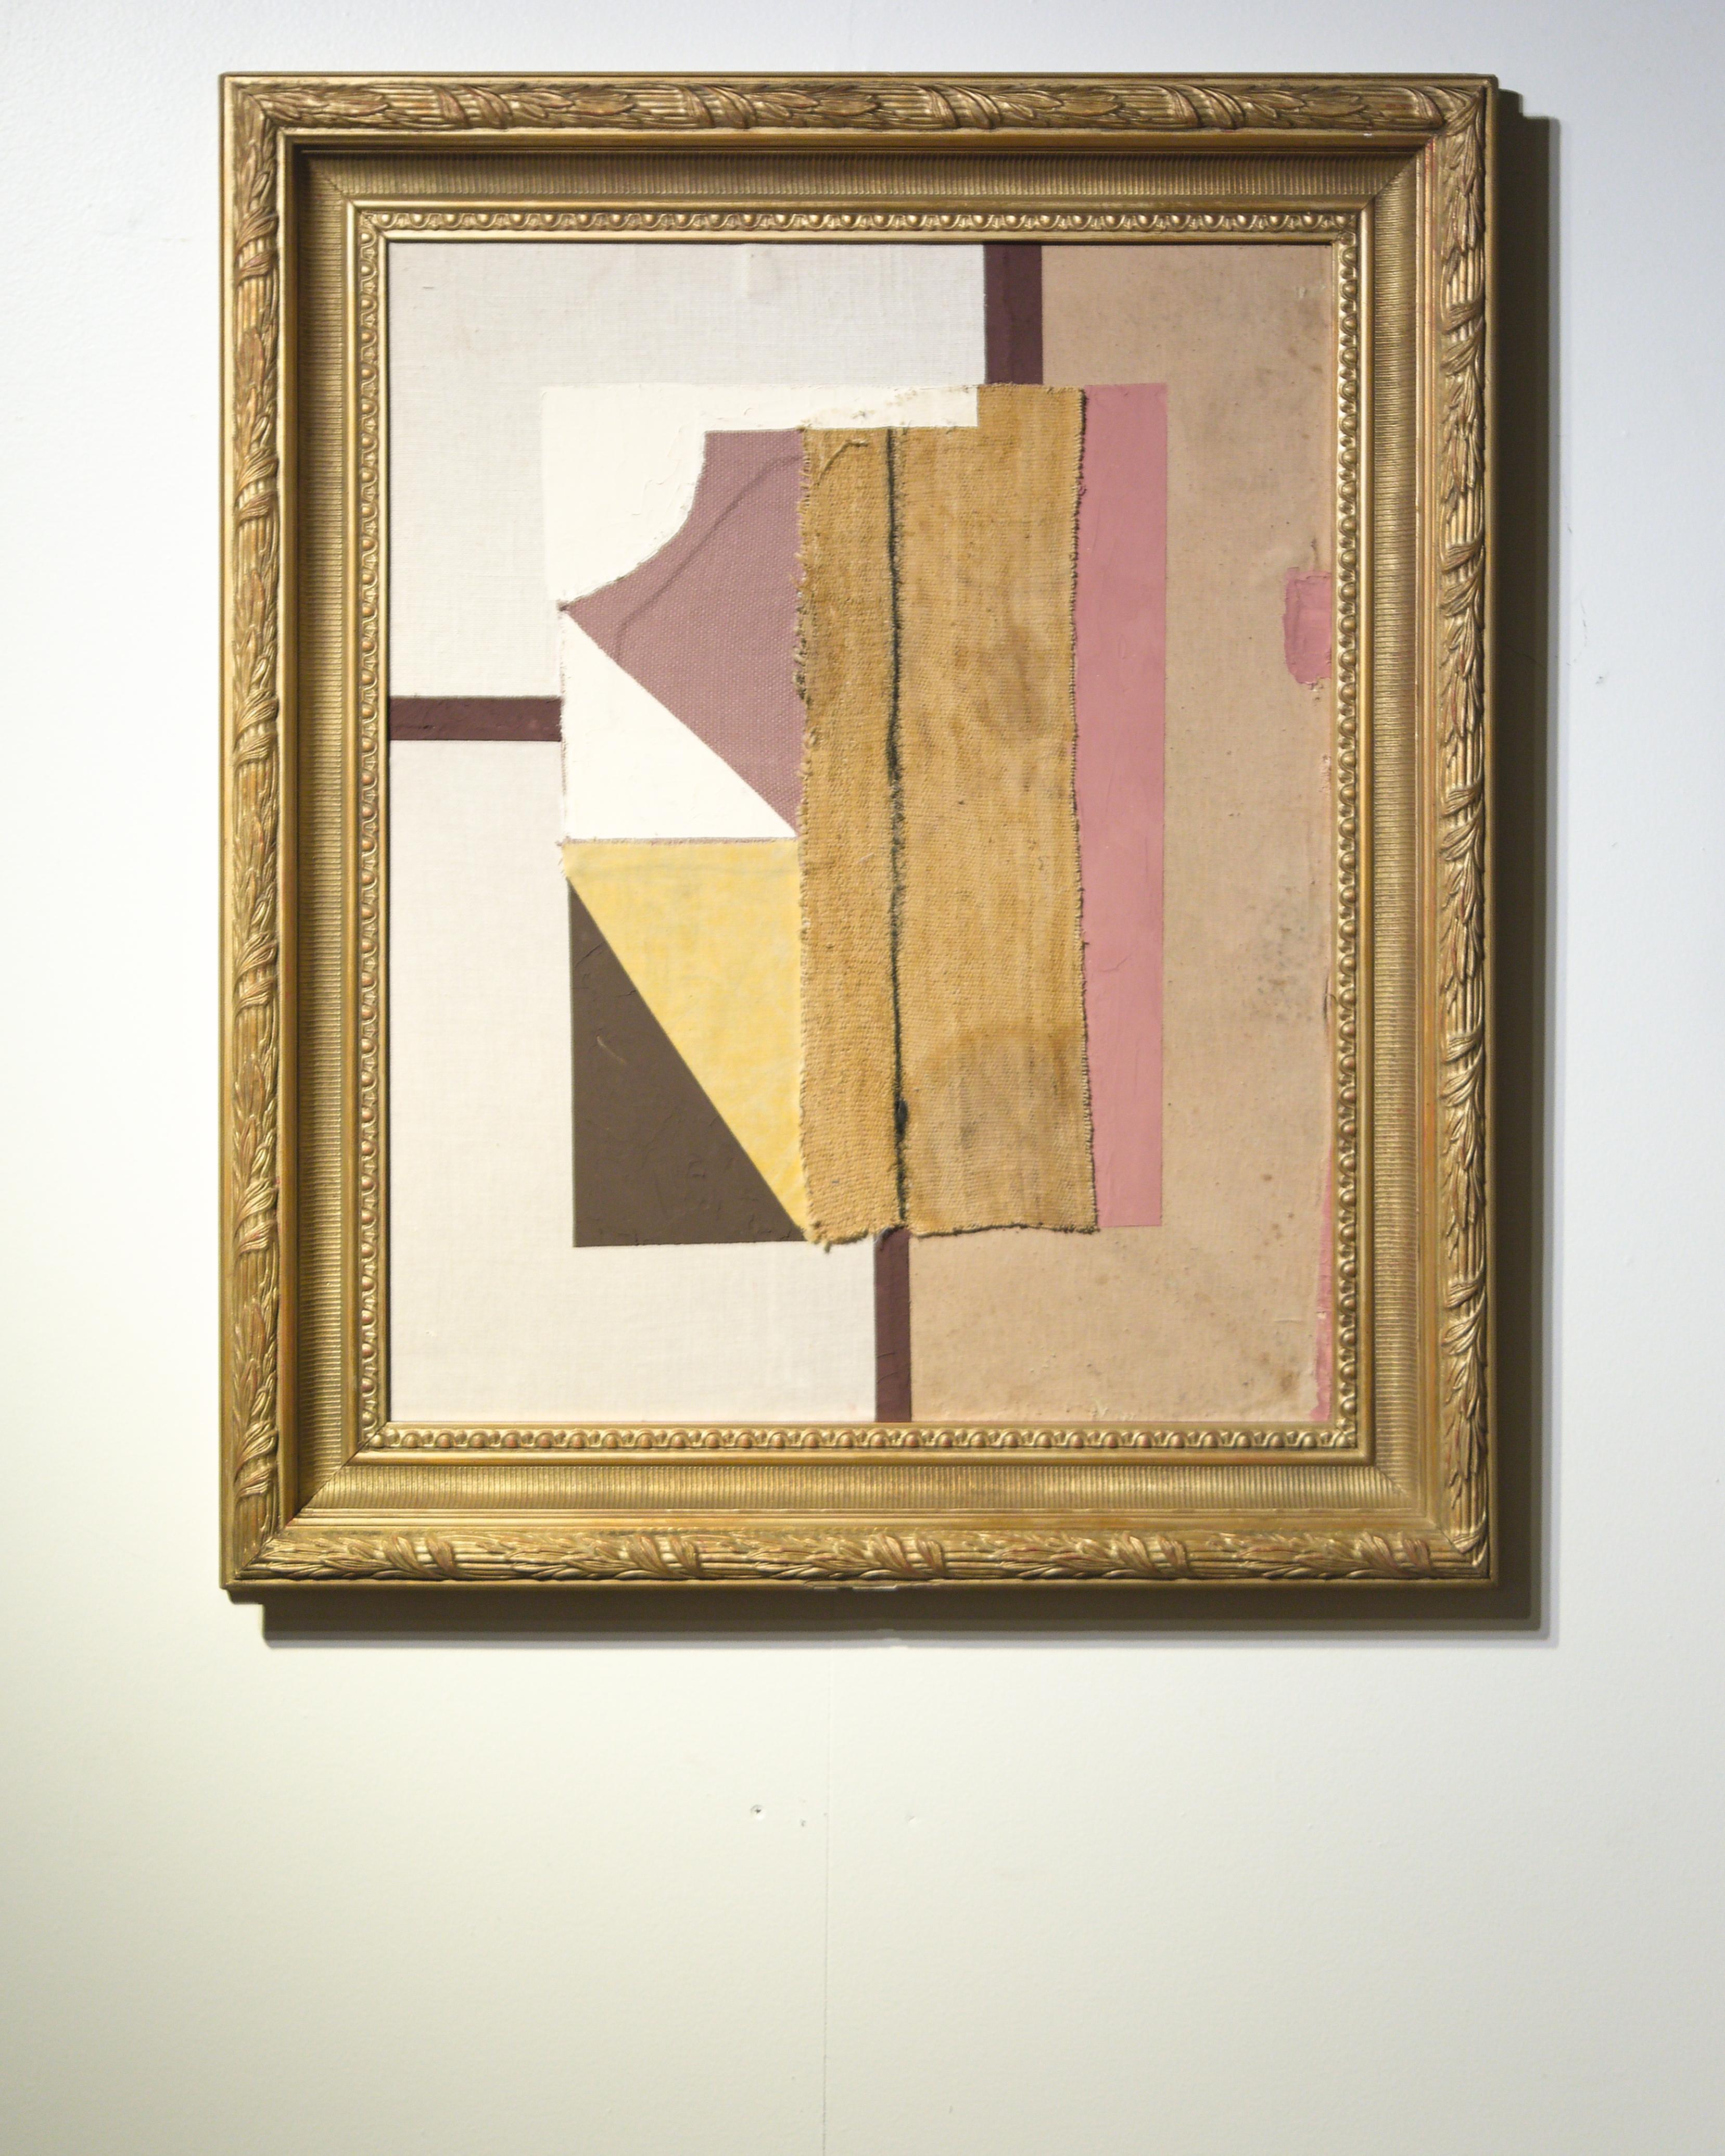 A framed textile collage by artist Raoul Morren, made in 2023. This dynamic composition combines graphic shapes in a warm palette of beiges, browns, ochres and pinks. Designed to be displayed with any orientation.

Raoul Morren, is known for his